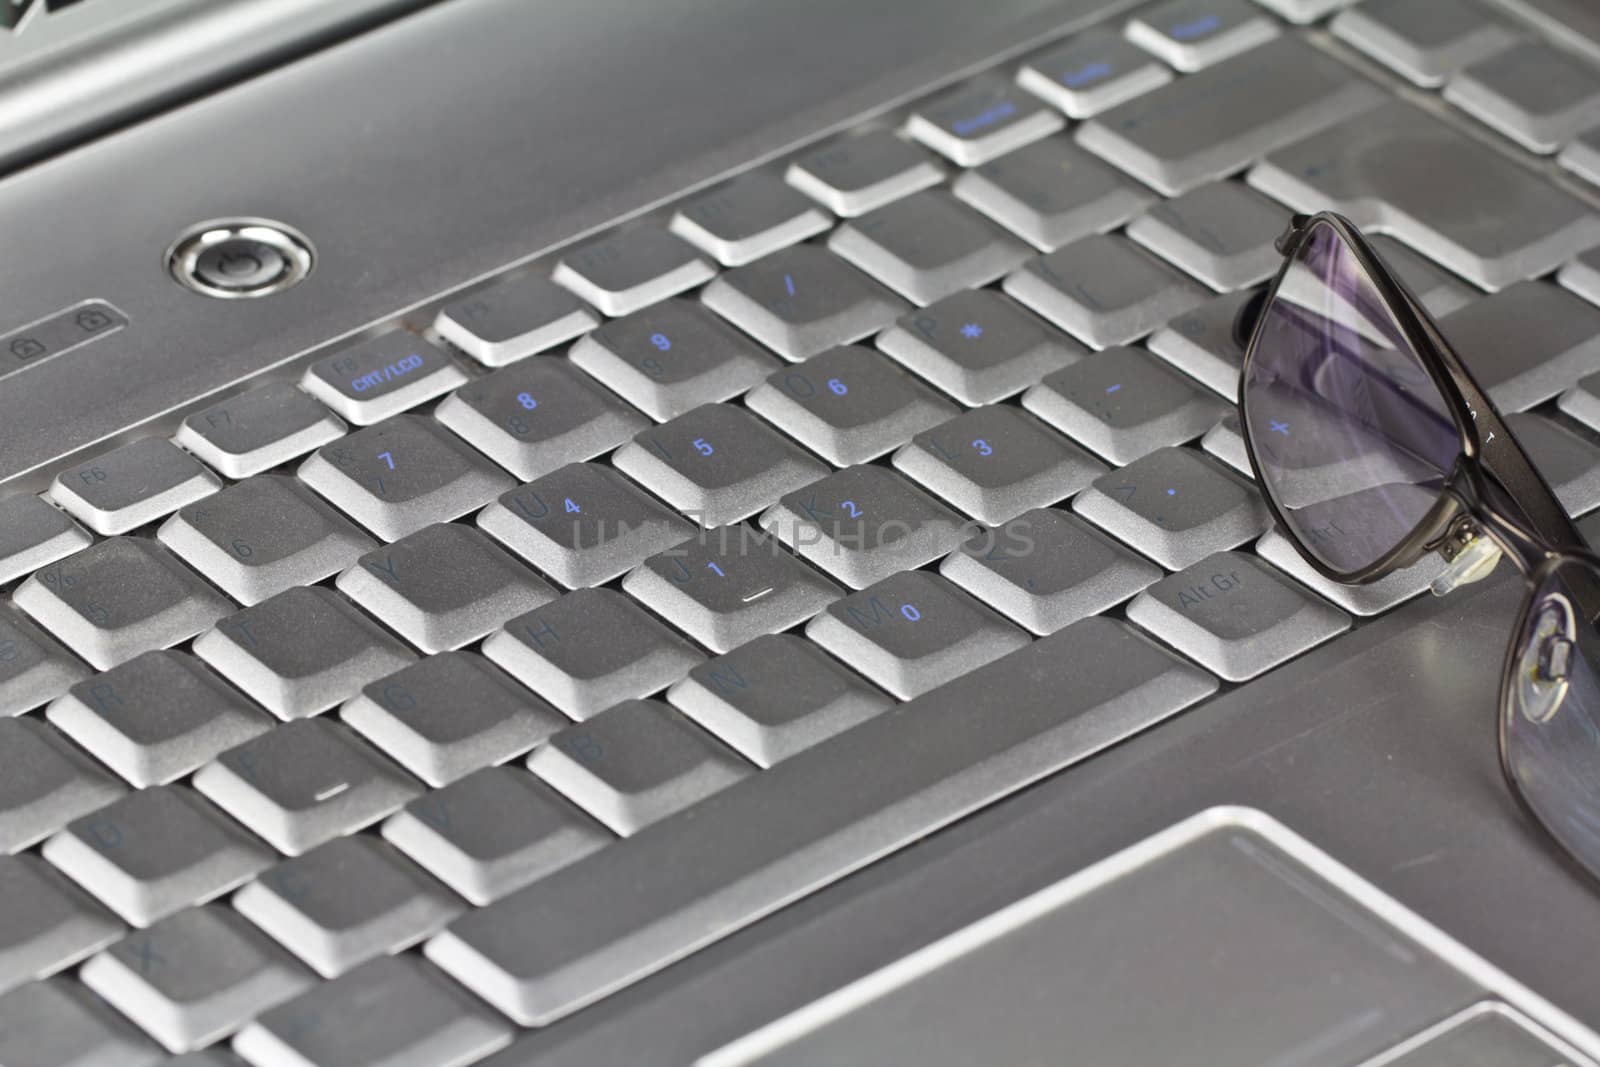 A laptop Keyboard and Glasses